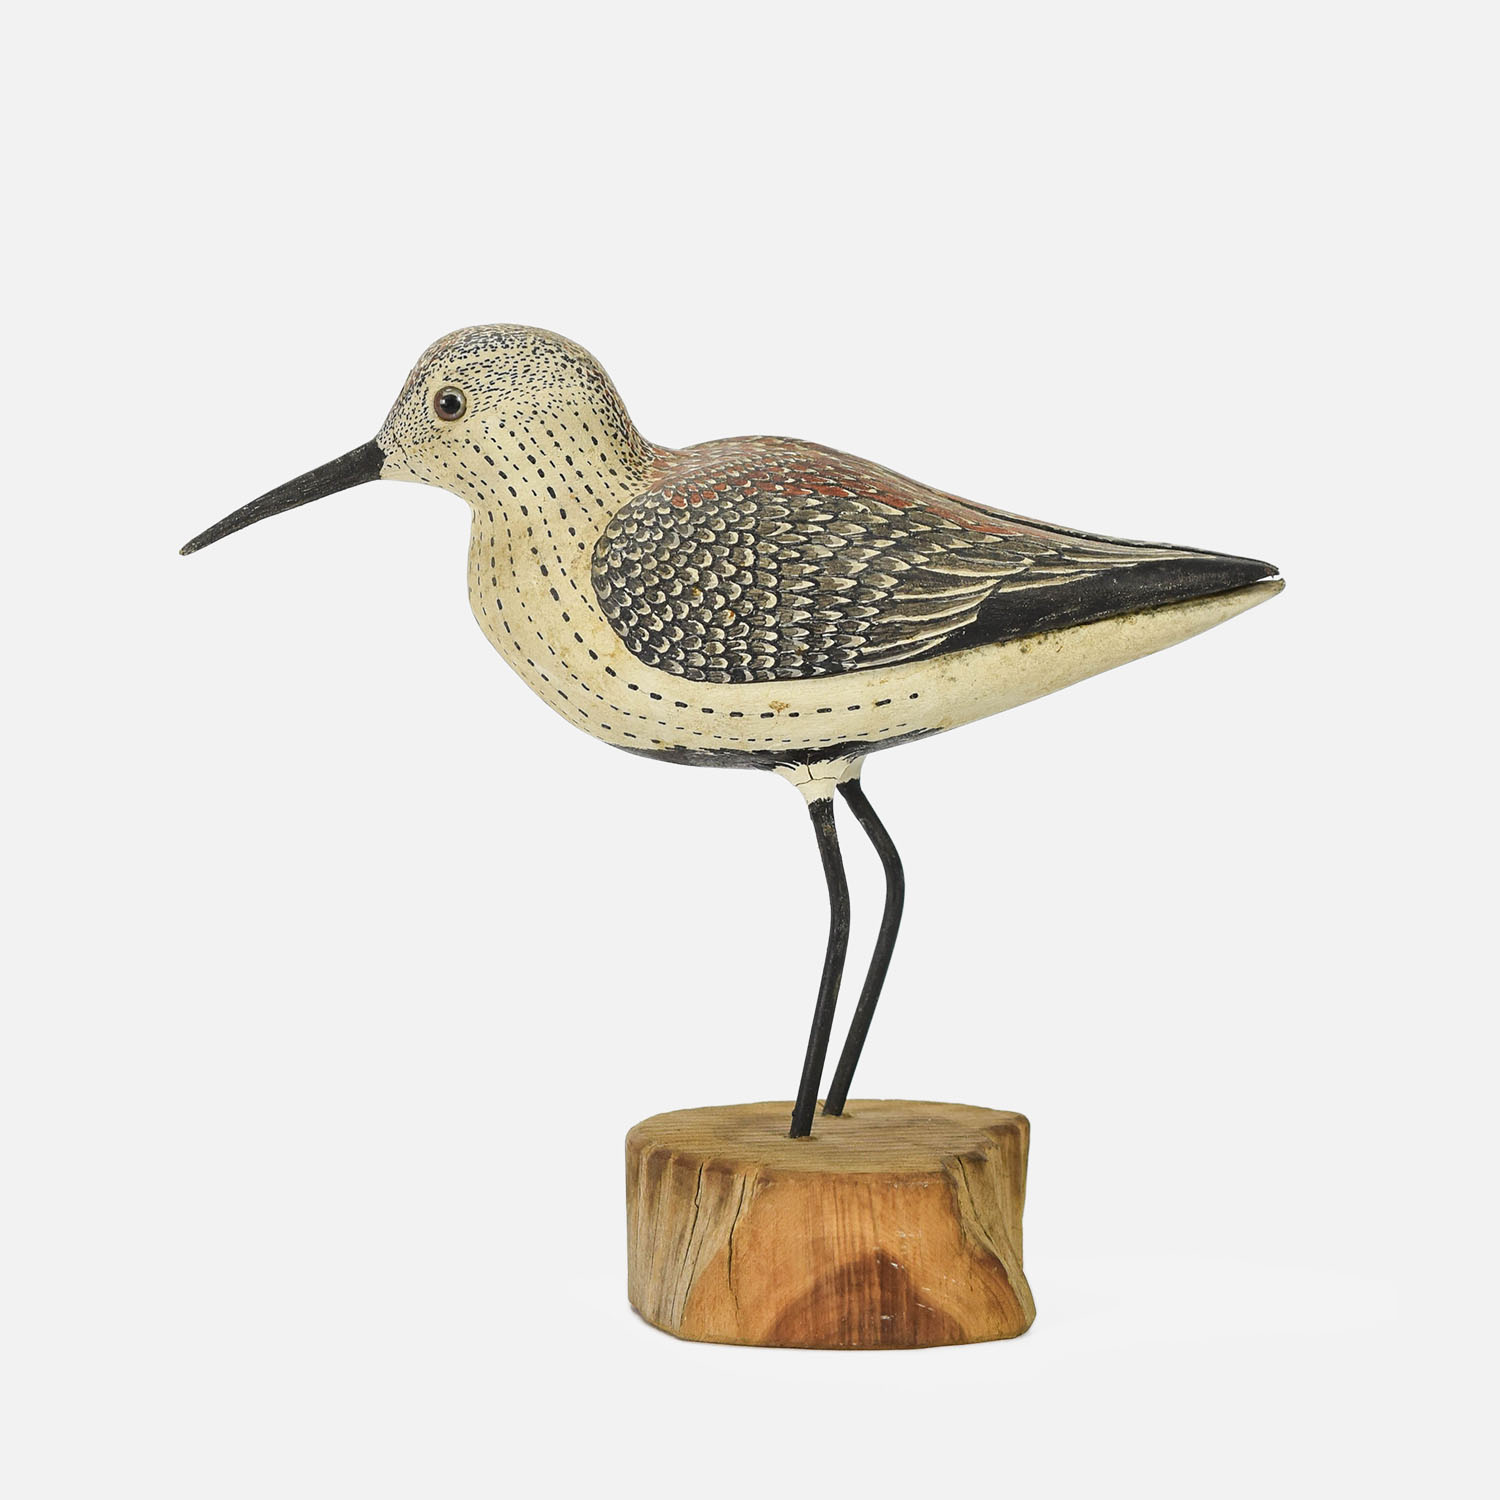 Signed and Dated Shorebird Carved Dunlin Decoy